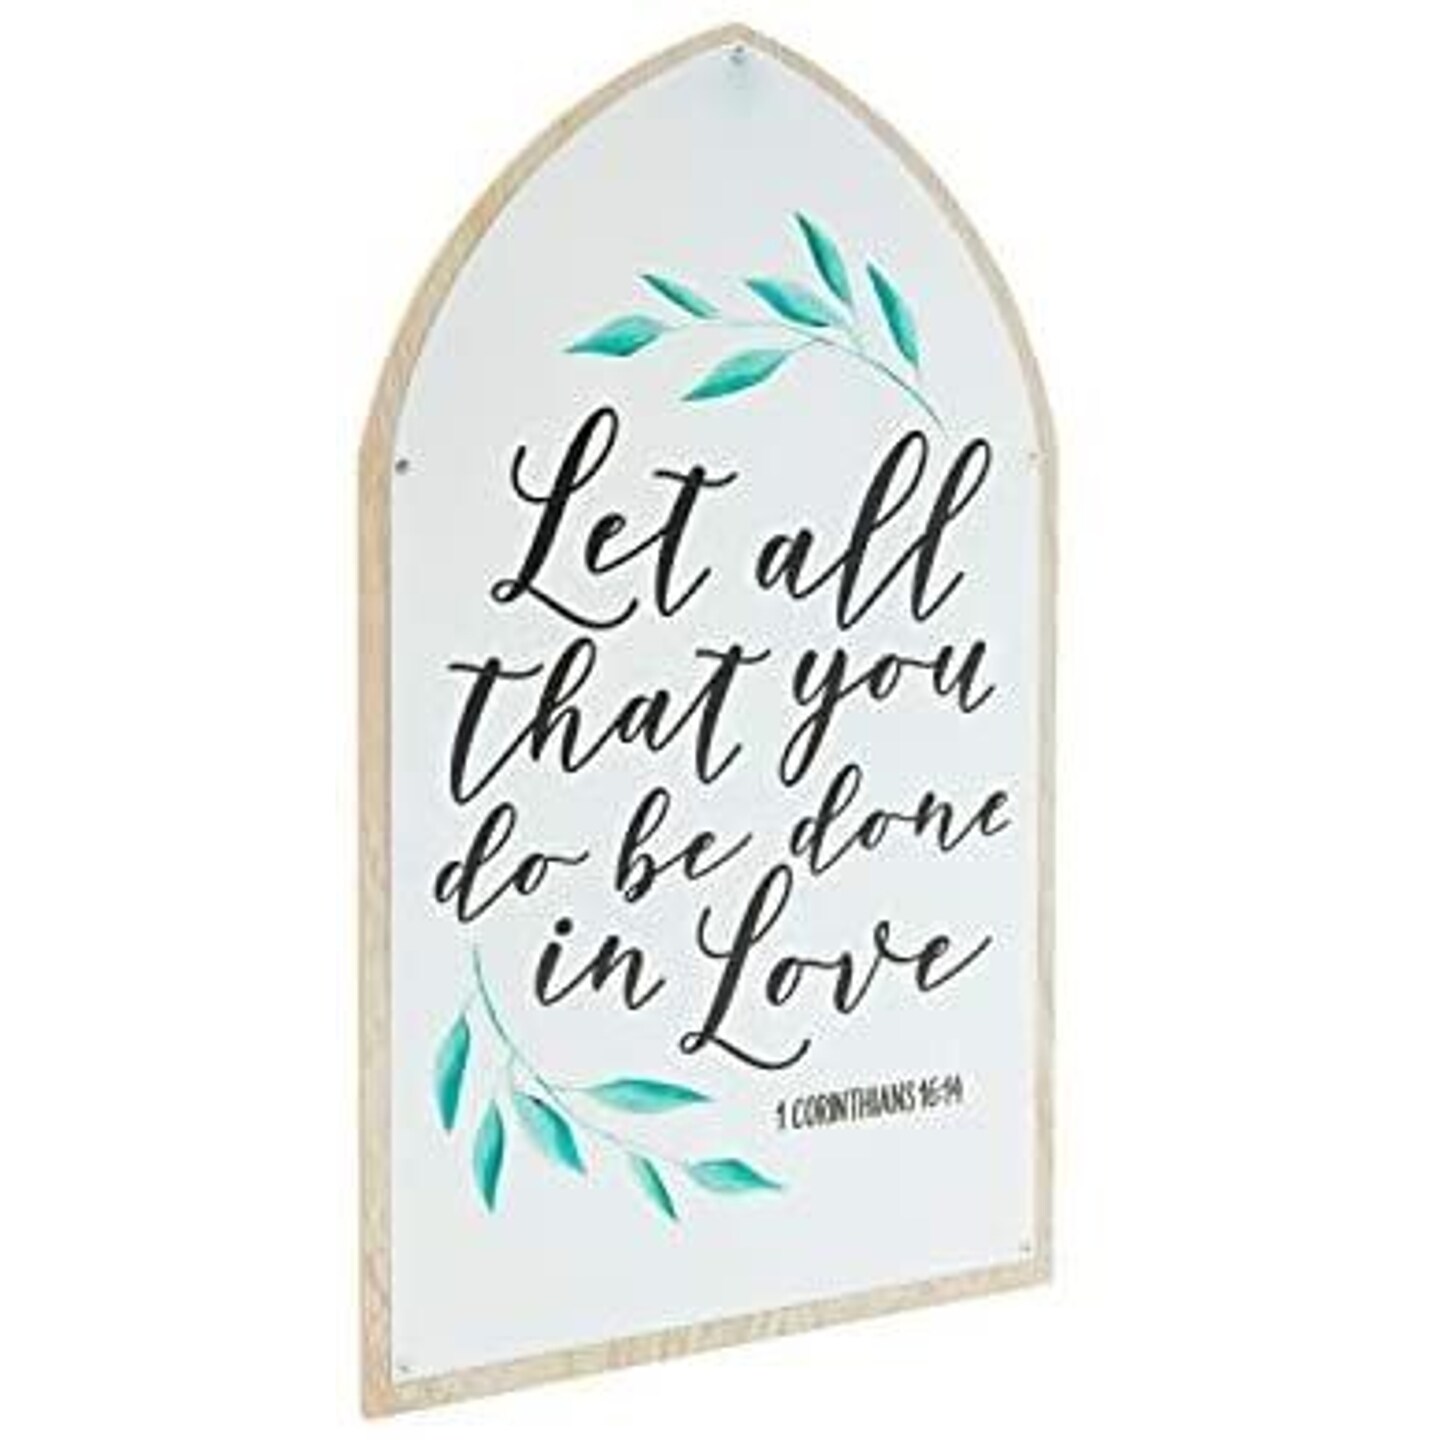 Christian Wall Art Home Decor with Scripture, 1 Corinthians 16:14 (9 x 15 In)